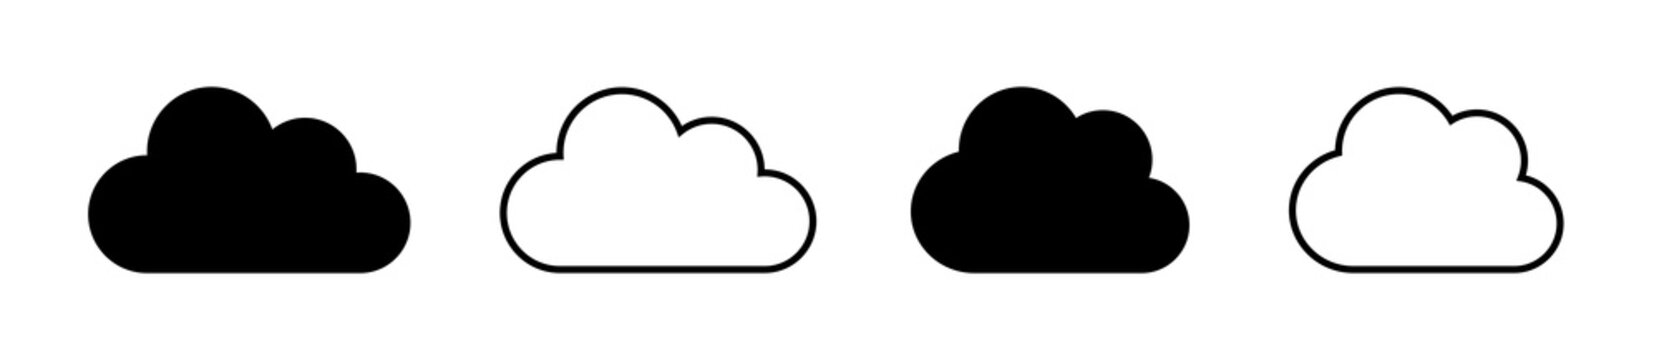 Cloud icon set - vector. cloud symbol in line and glyph style. Vector illustration